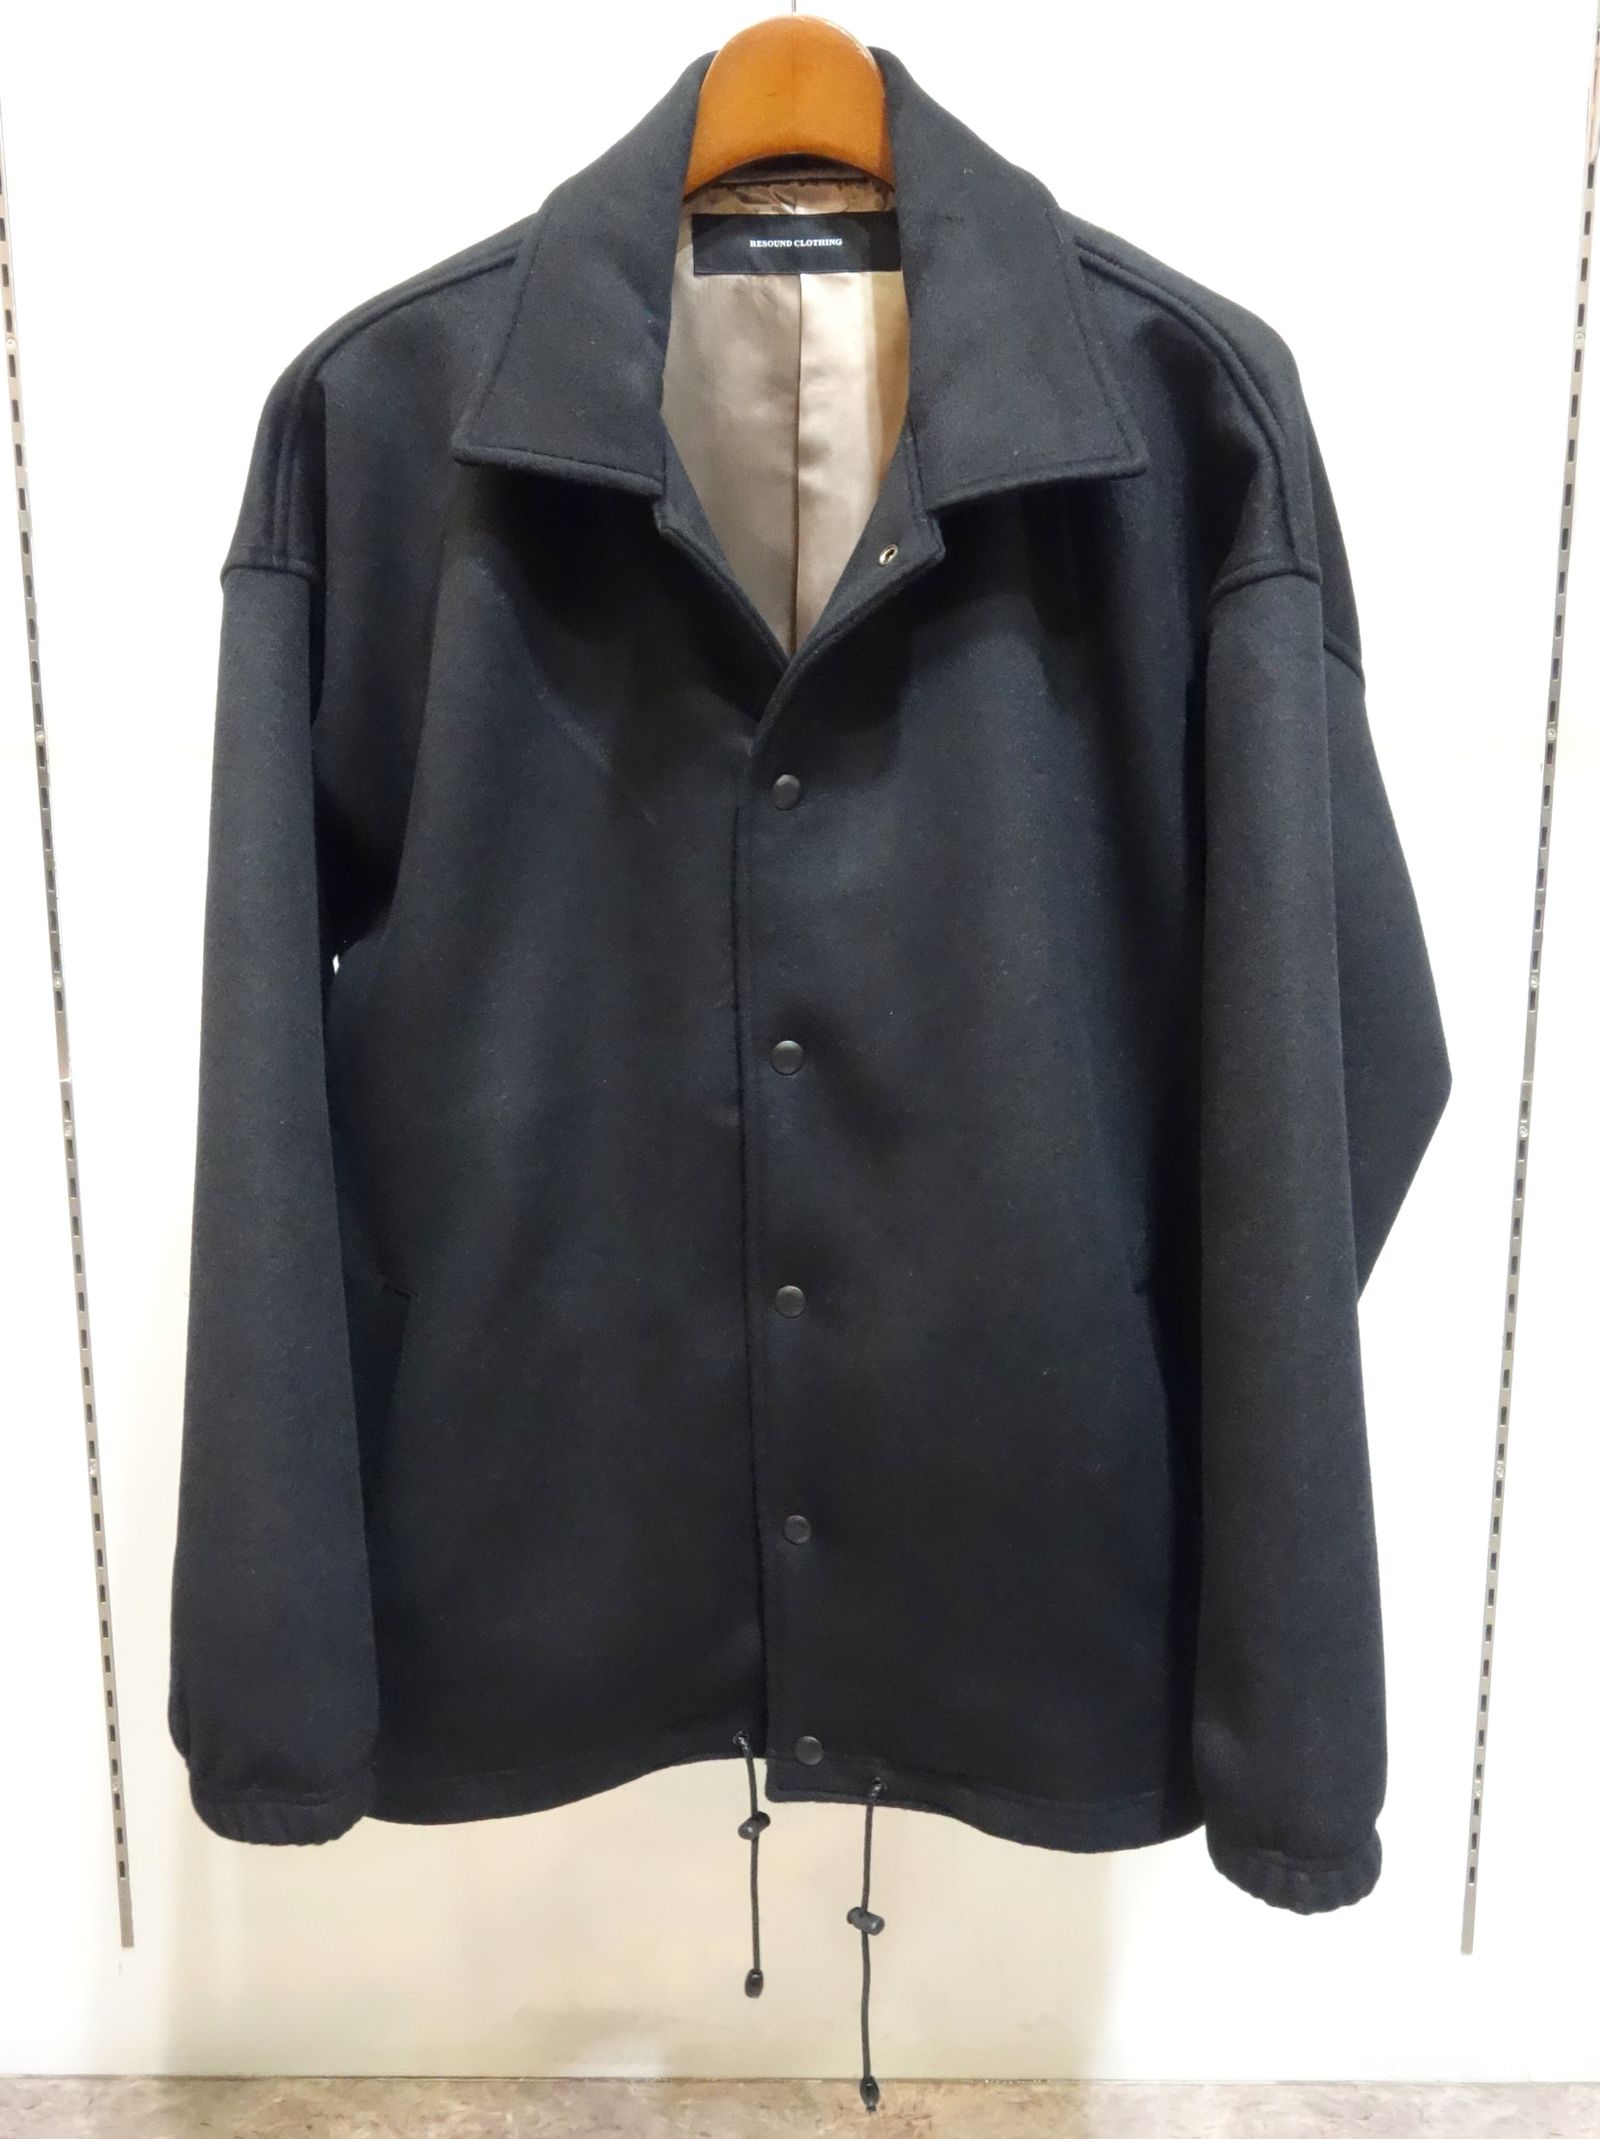 RESOUND CLOTHING - 【※期間限定販売※】 OVER WOOL COACH JACKET